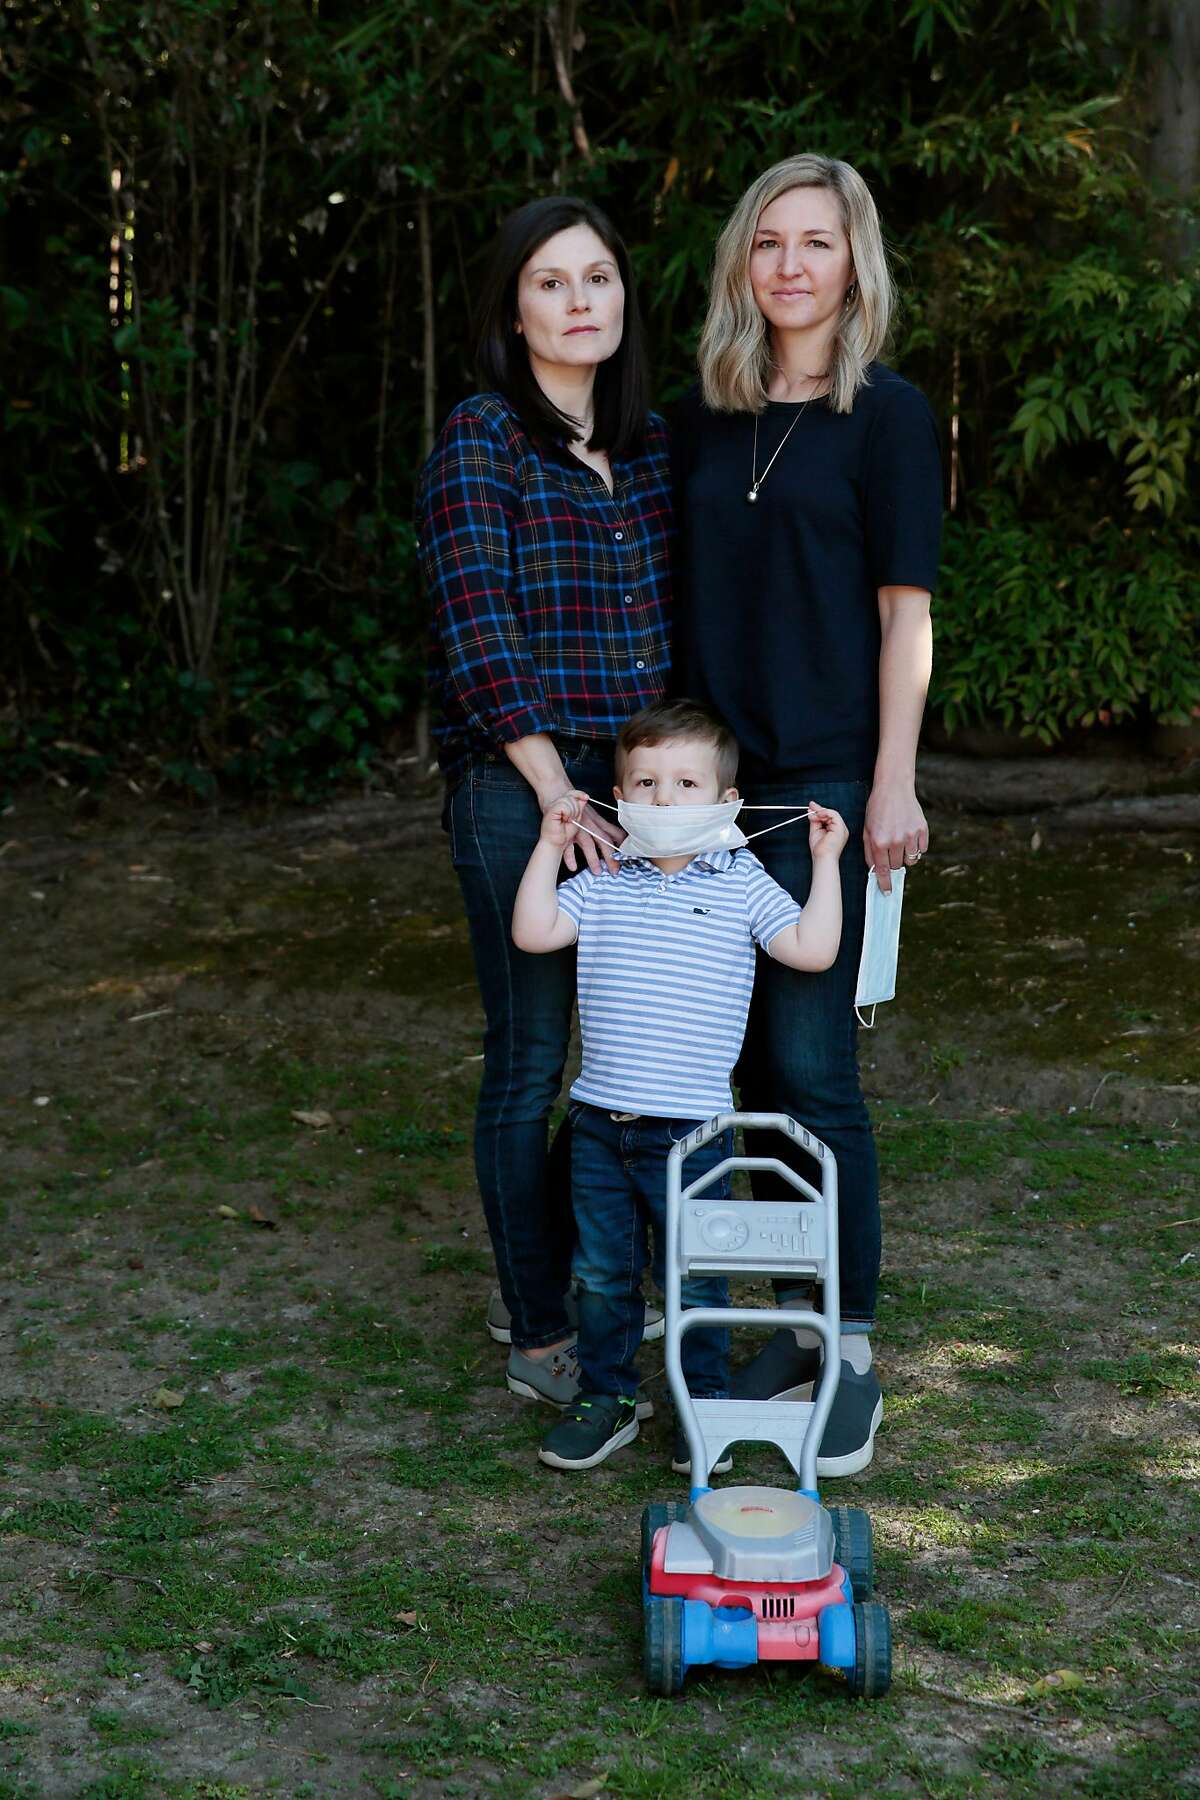 Naomi Thorne, left, Katherine Thorne, and their 2-year-old son Everett pose for a portrait at their home in Novato, California, Tuesday, March 3, 2020. The family is taking precautionary actions to ward off the novel coronavirus. Ramin Rahimian/Special to The Chronicle